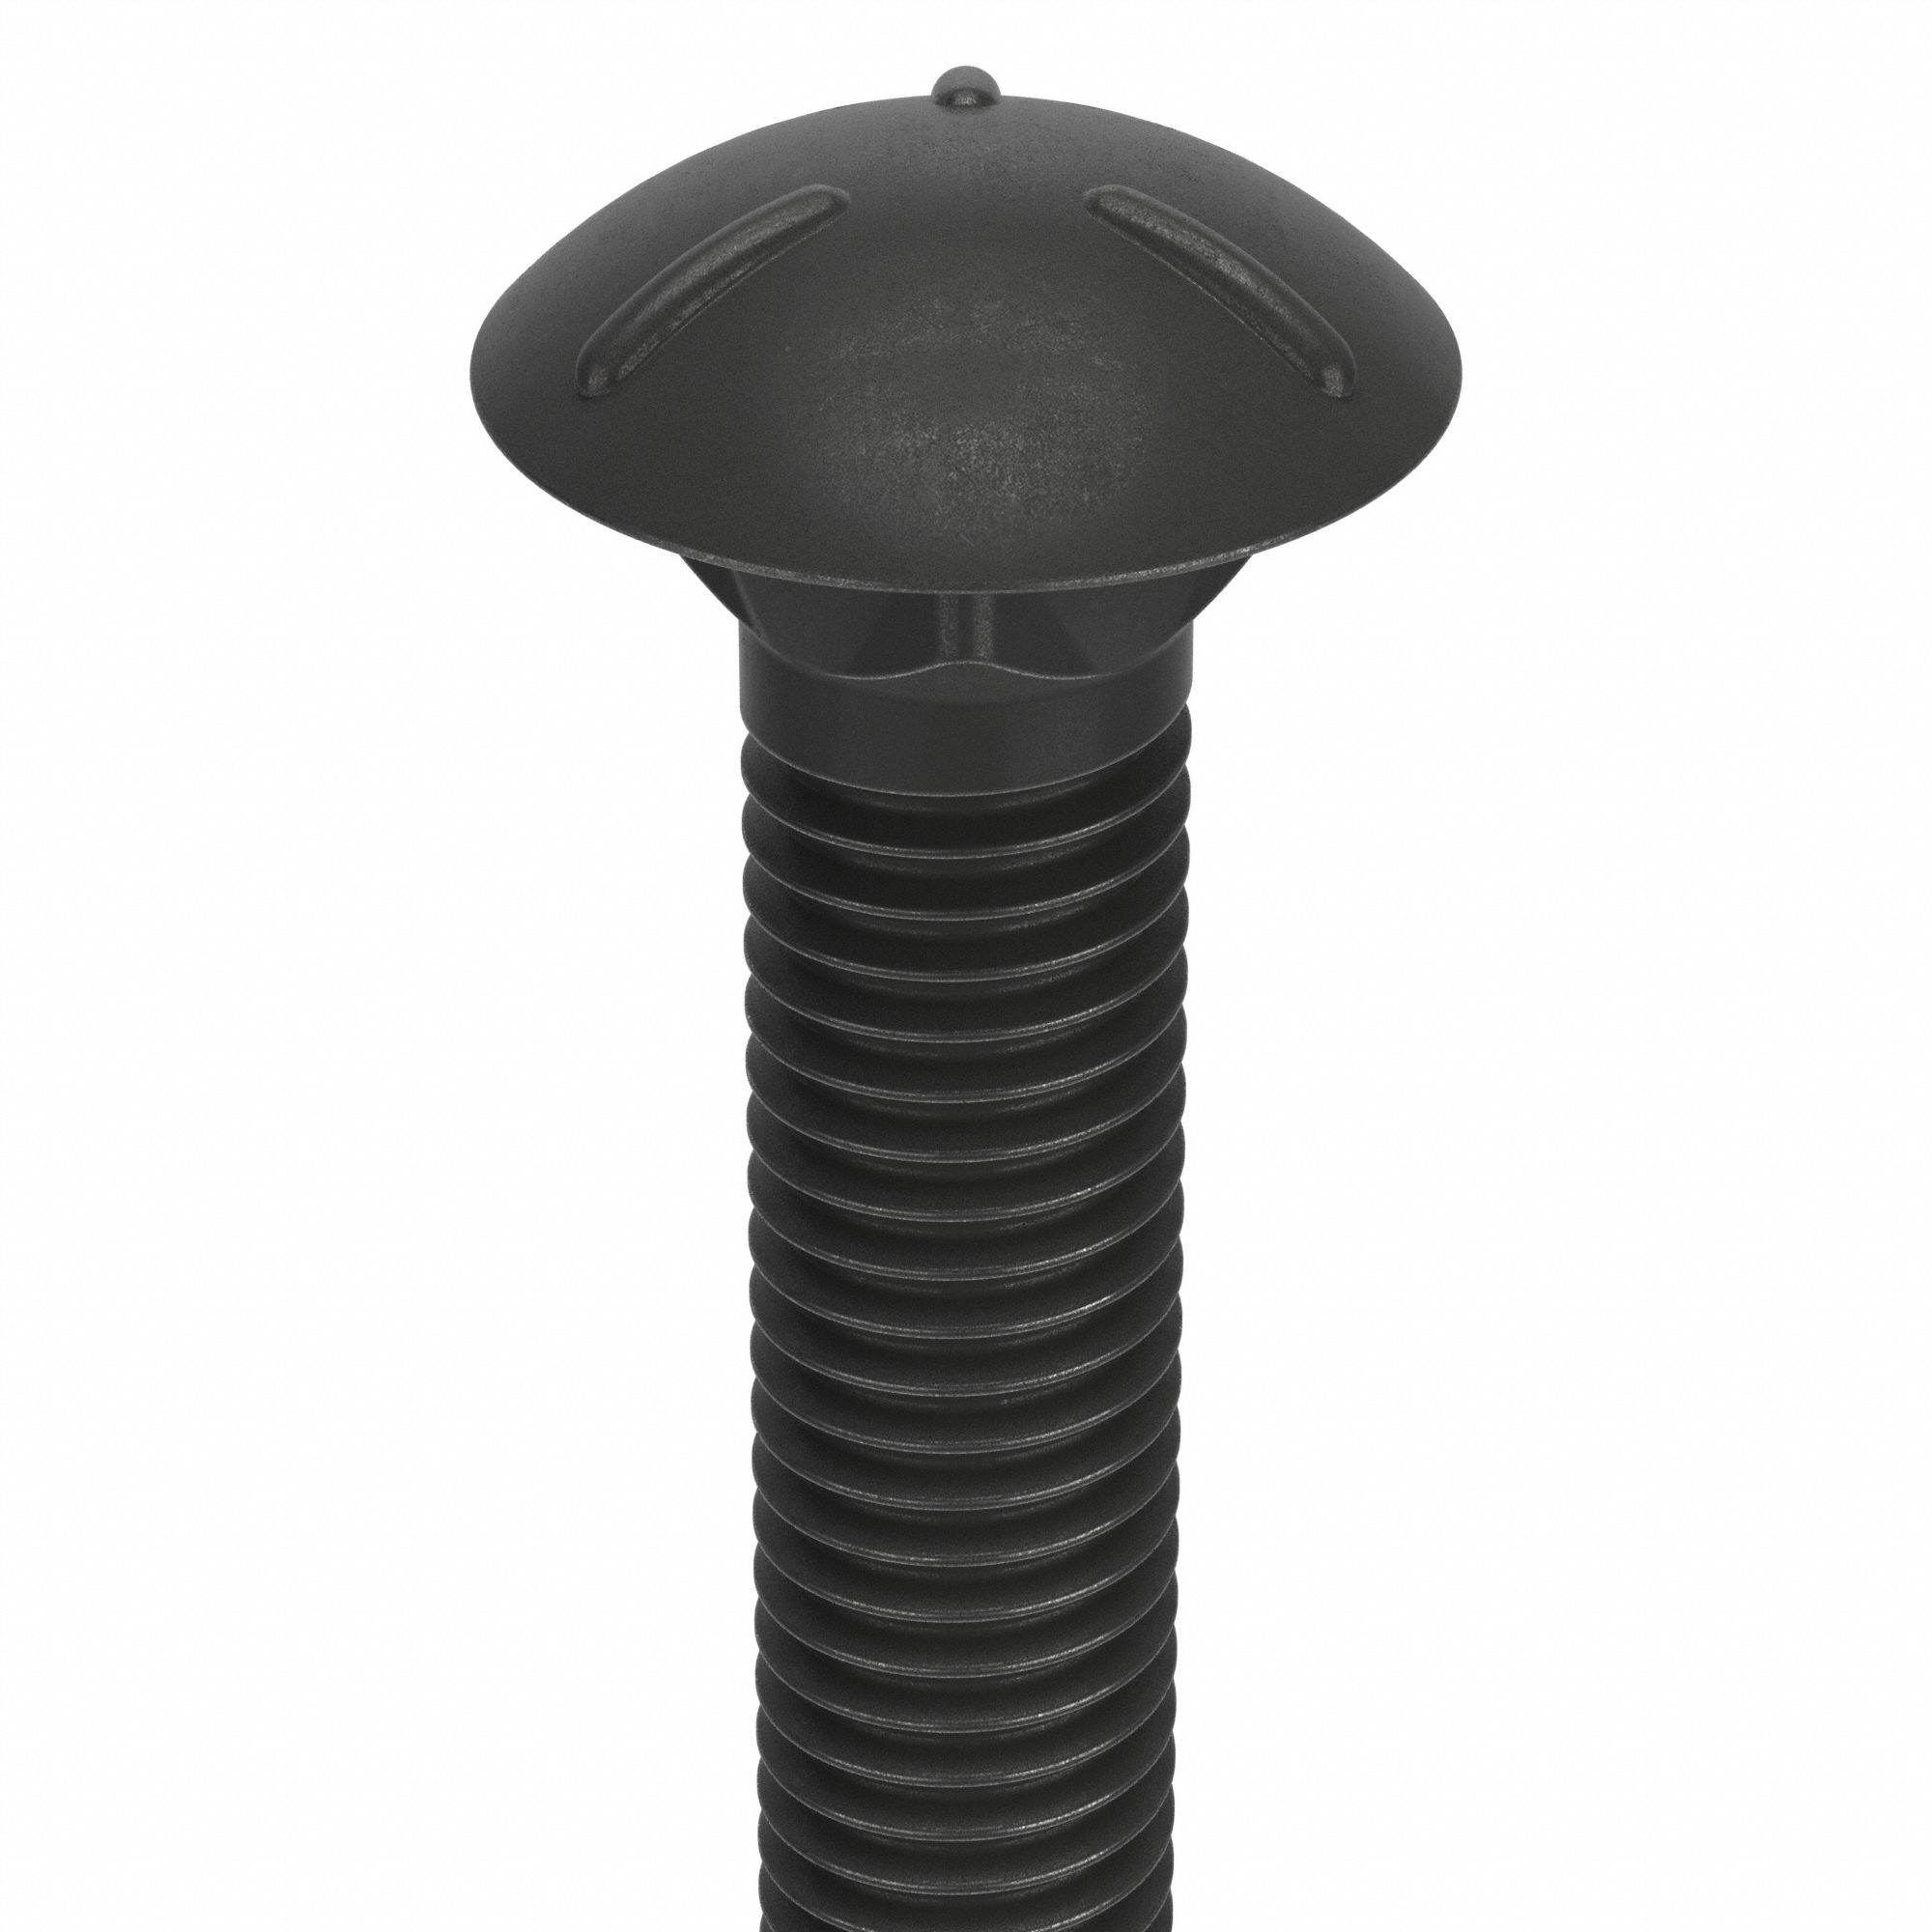 Grainger Approved Carriage Bolt Square Steel Grade 5 Black Oxide 12 13 Thread Size 8 In 